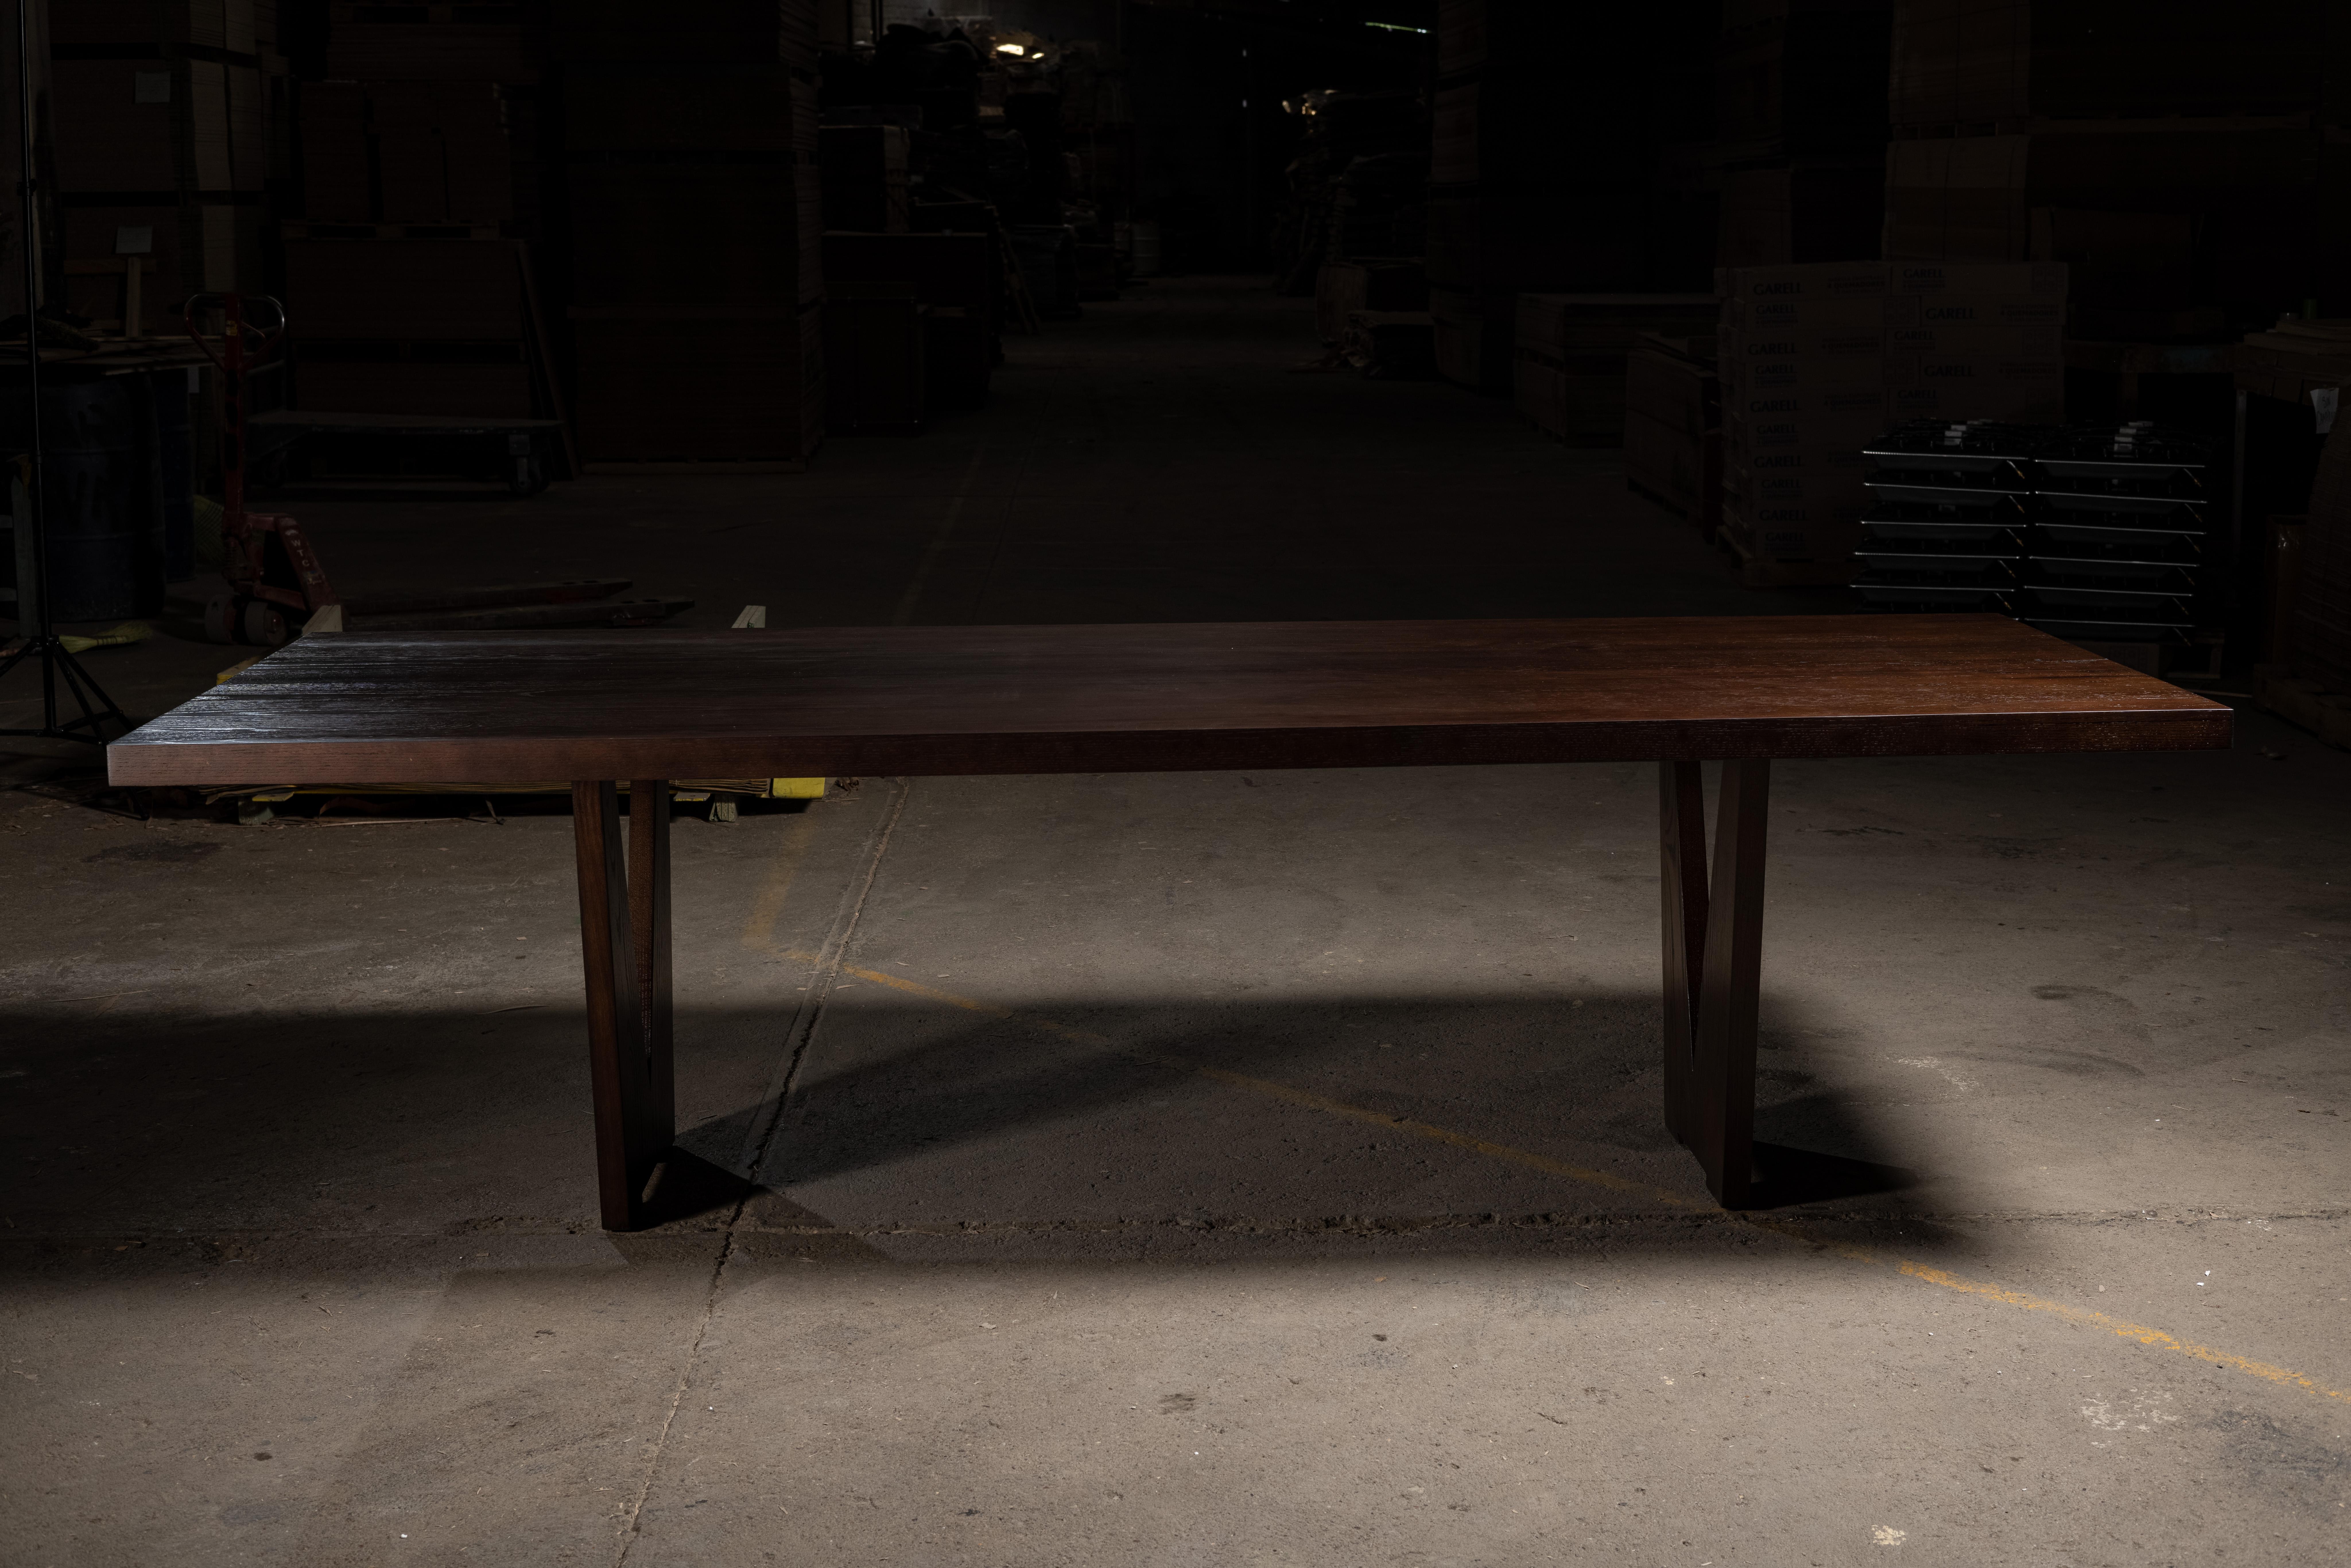 Handcrafted solid peruvian walnut dining table.
Tabletop is 2